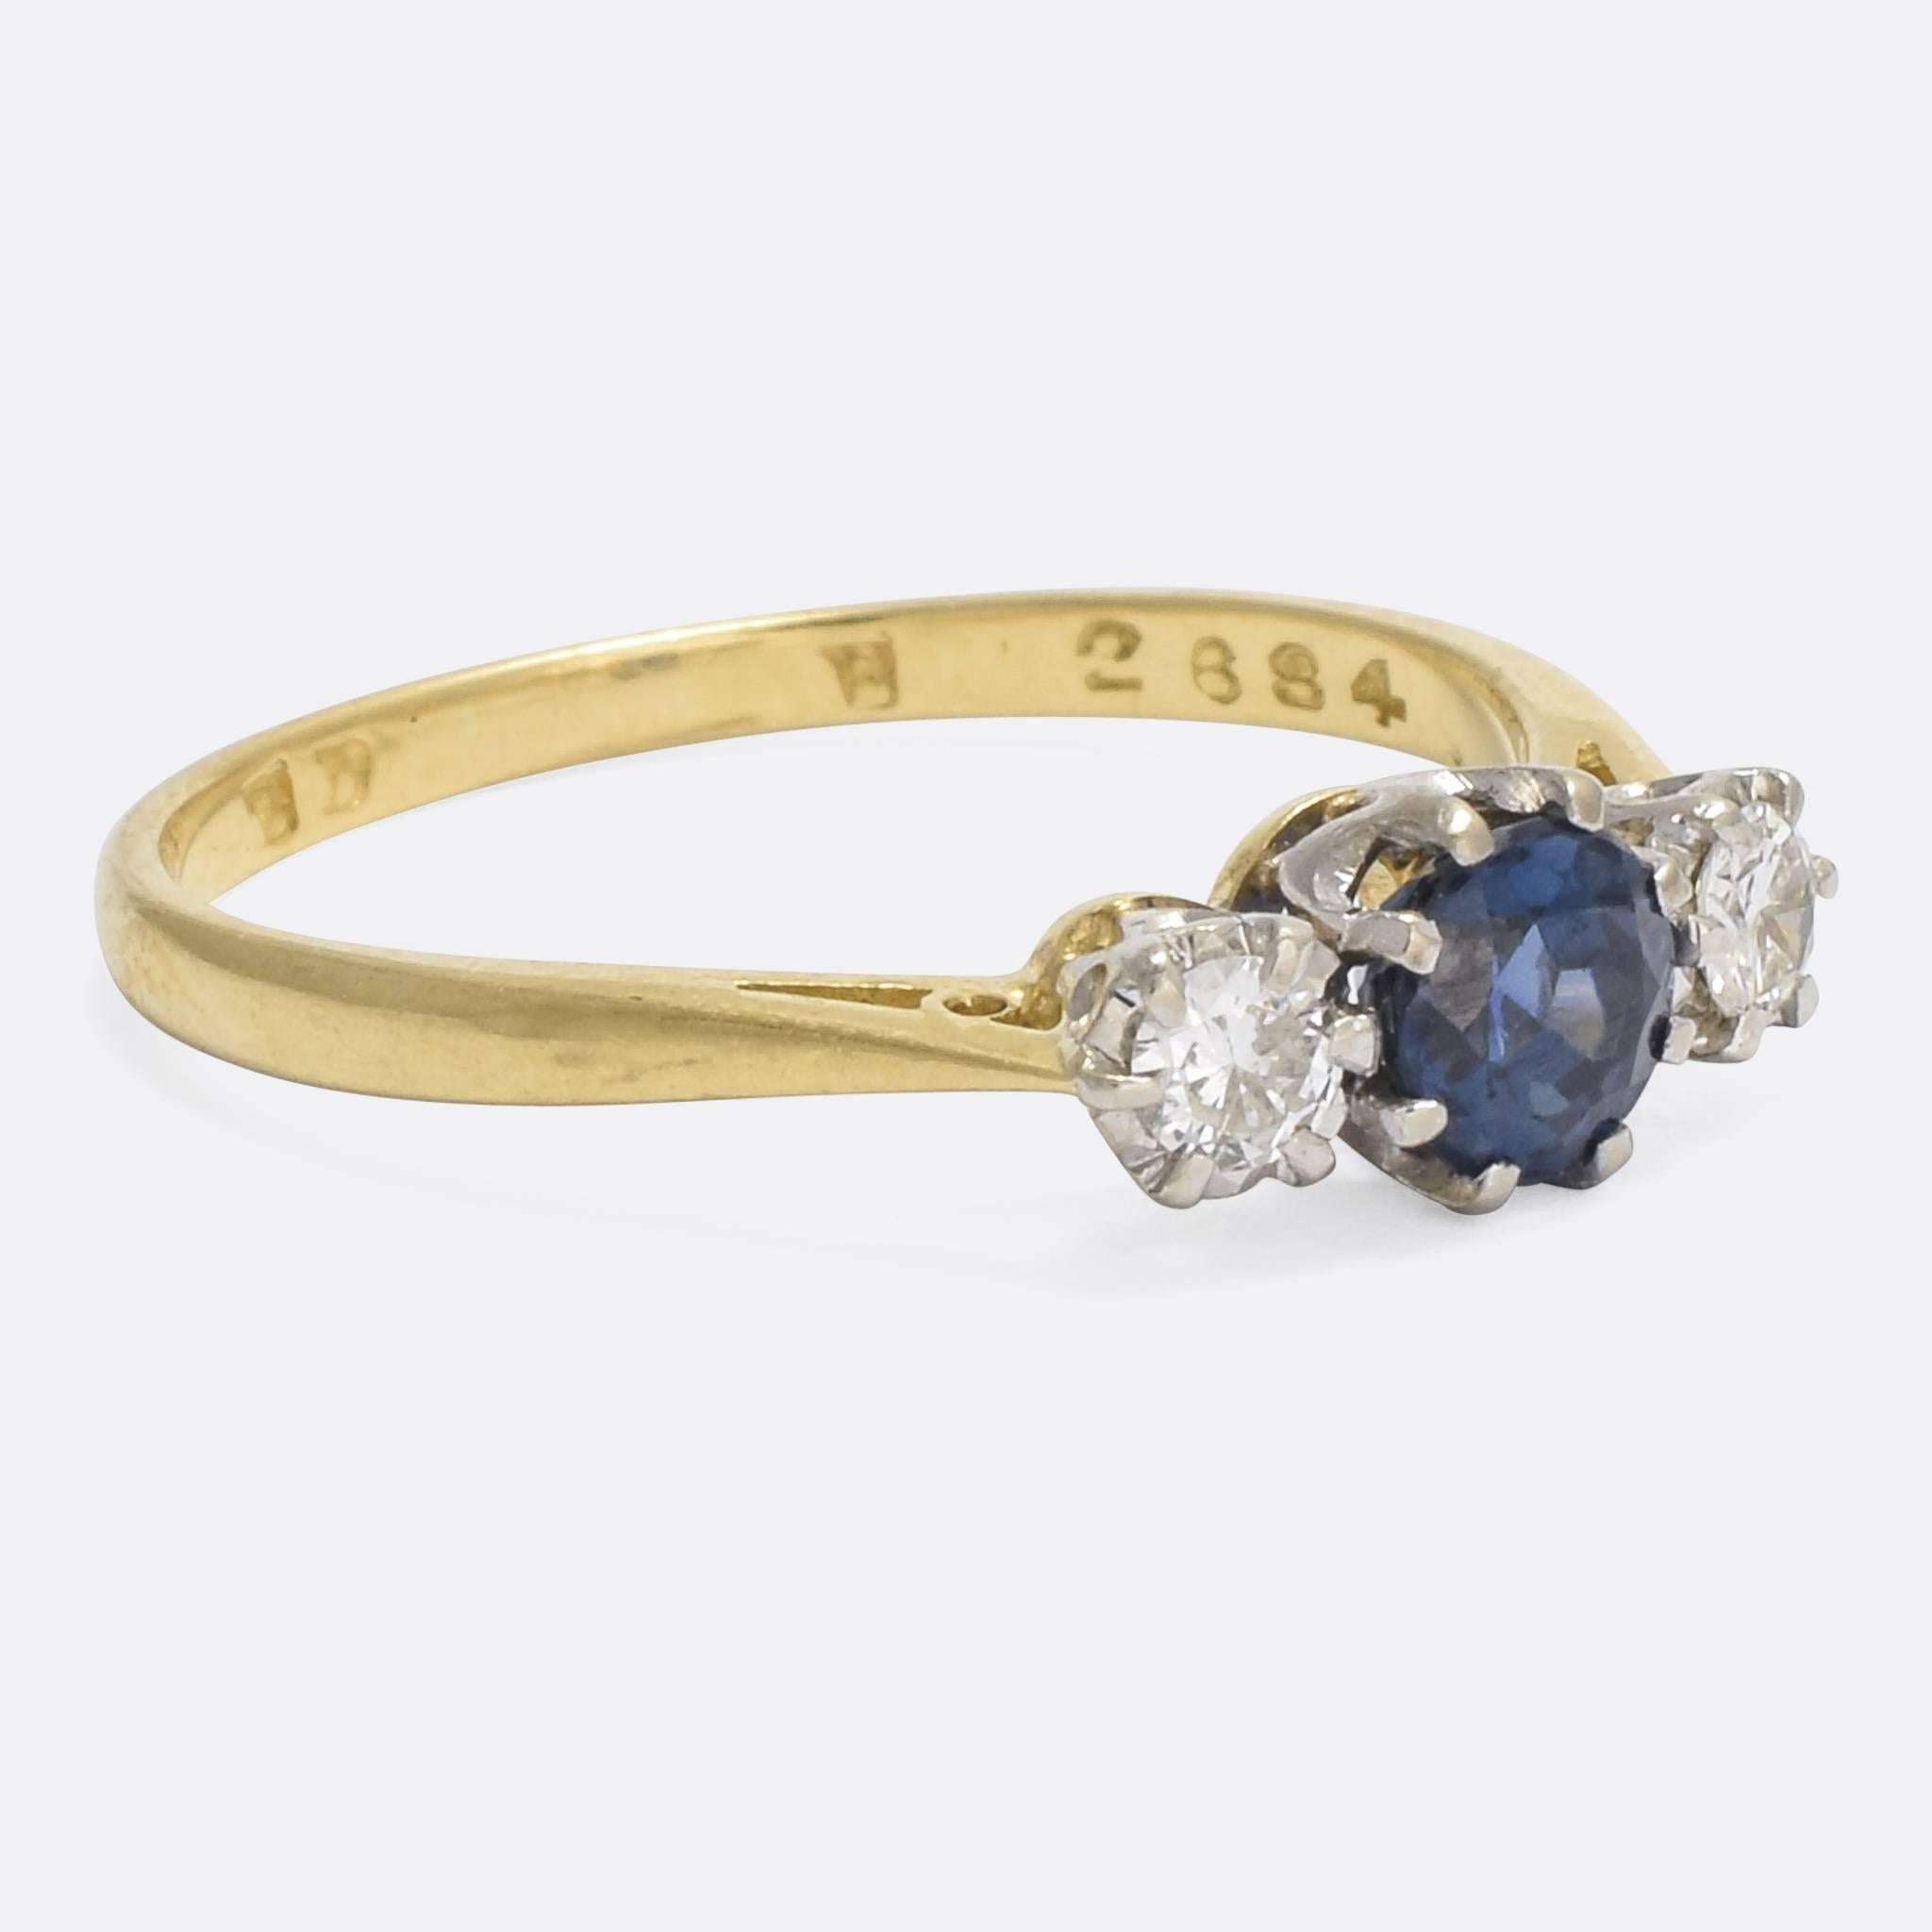 A sweet Edwardian three-stone ring, set with a central blue sapphire and two brilliant cut diamonds. With elegant pinched shoulders, the piece is modelled in 18k gold and platinum, and dates to the early 20th Century - circa 1910.

STONES
Natural